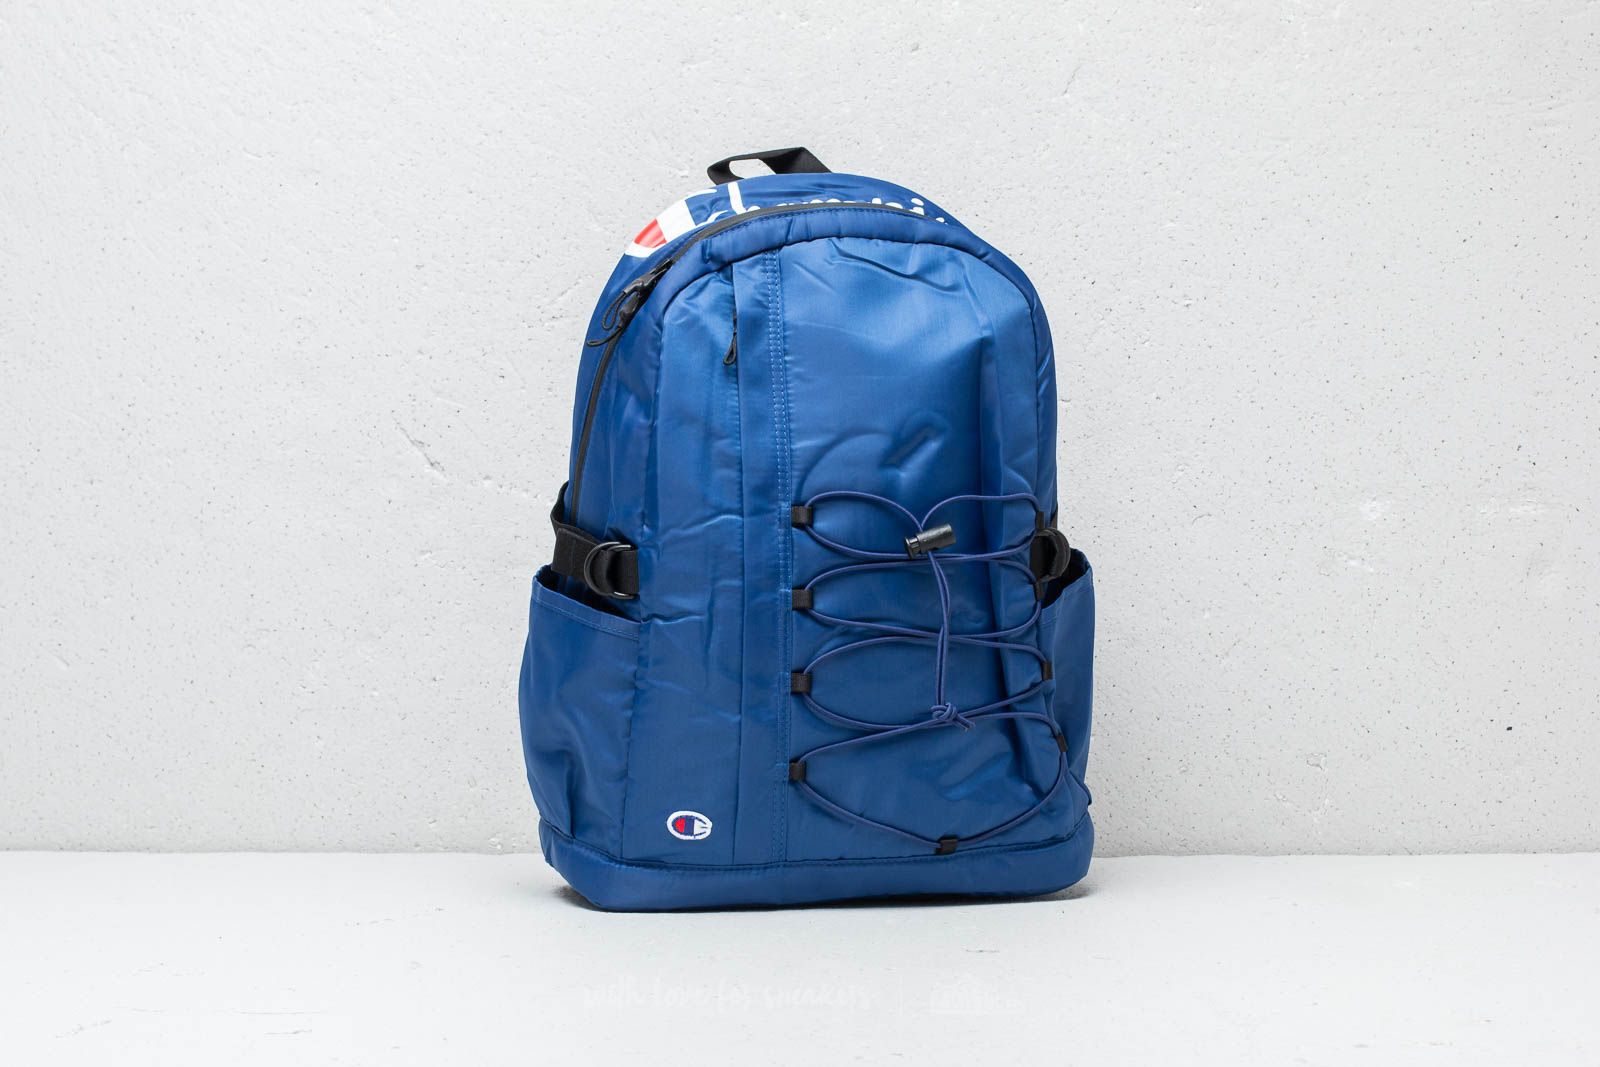 Batohy Champion Backpack Blue